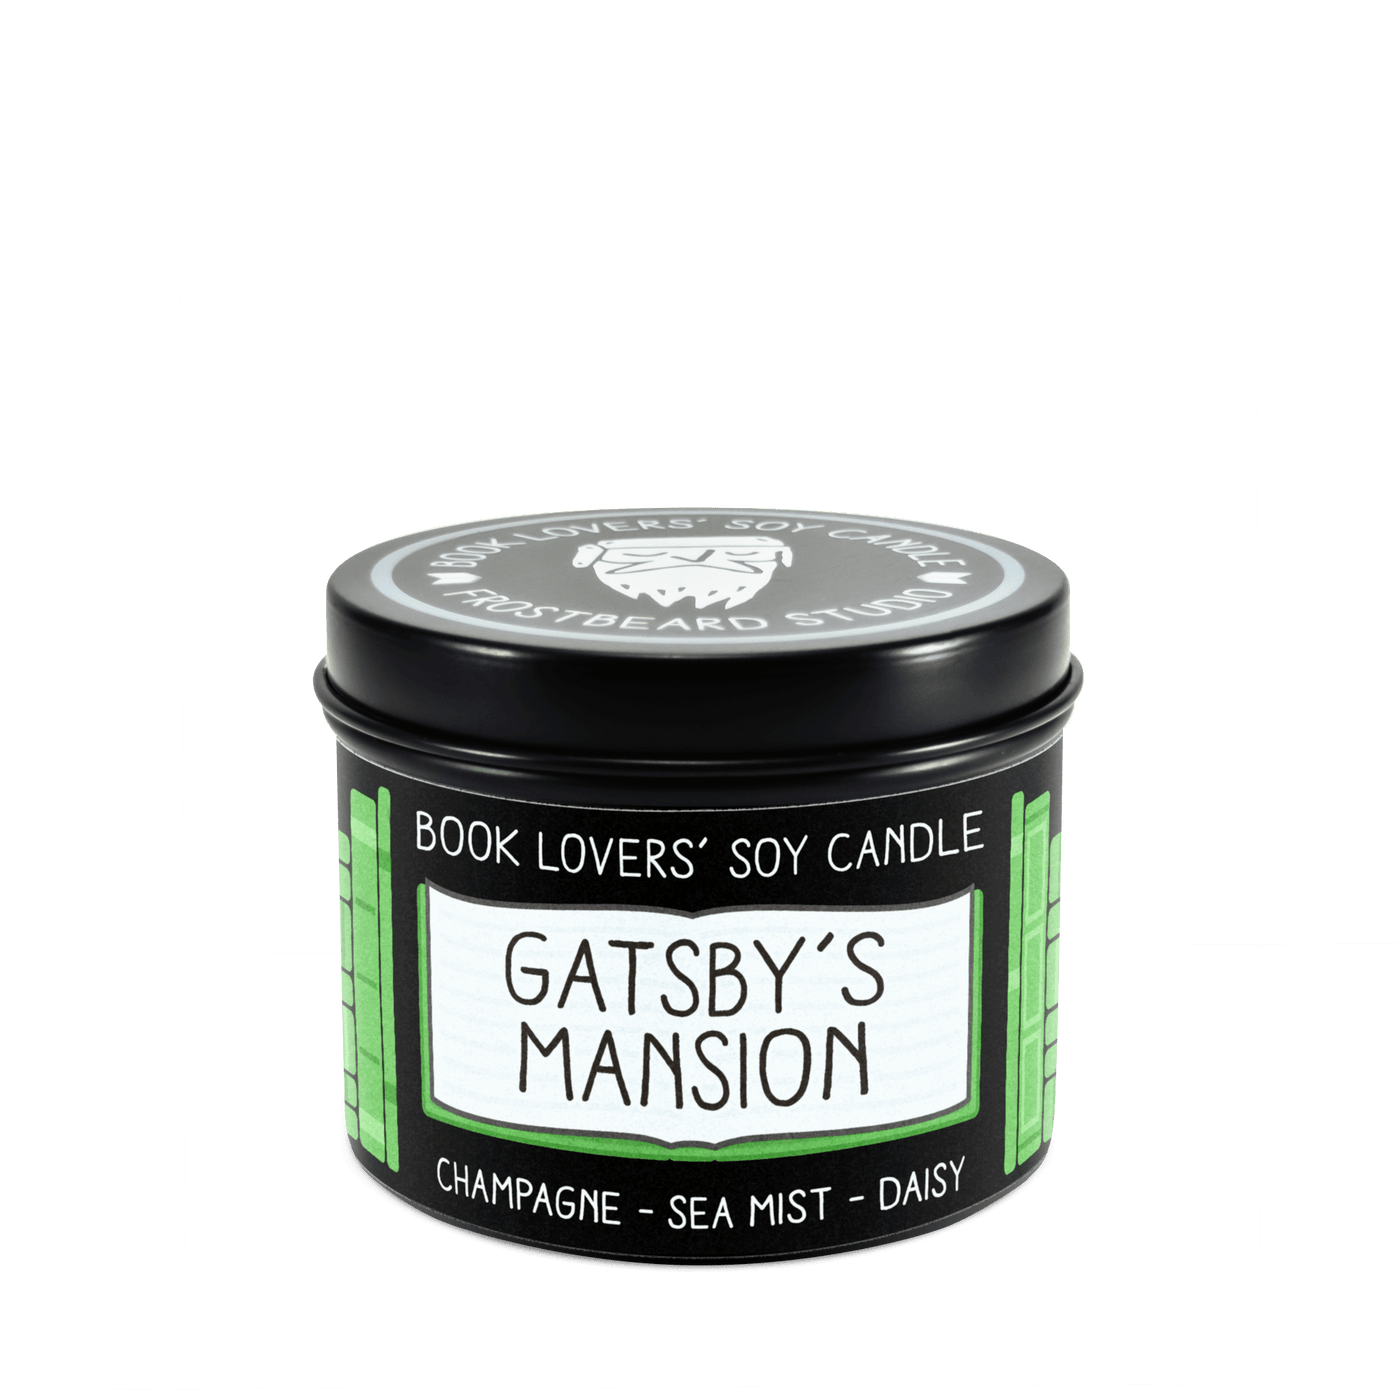 Gatsby's Mansion - 4 oz Tin - Book Lovers' Soy Candle - Frostbeard Studio